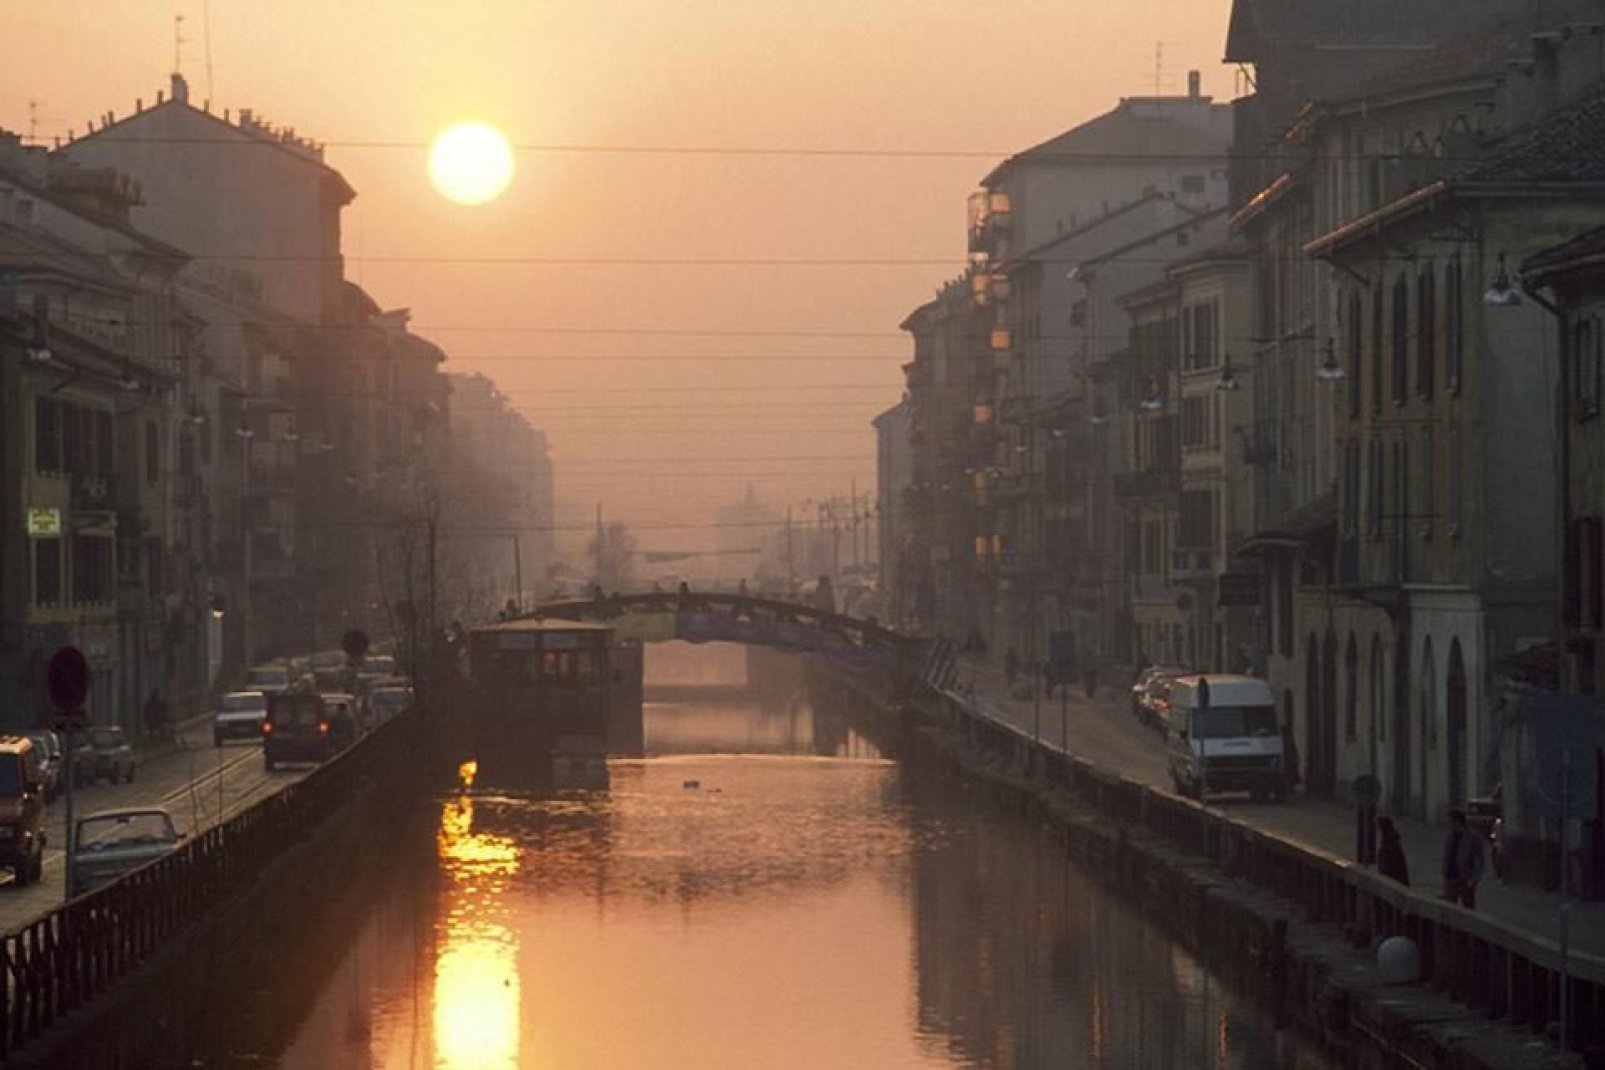 The Naviglio is a system of navigable canals around Milan that lead to Lake Maggiore, Lake Como, and the lower part of the river Ticino.